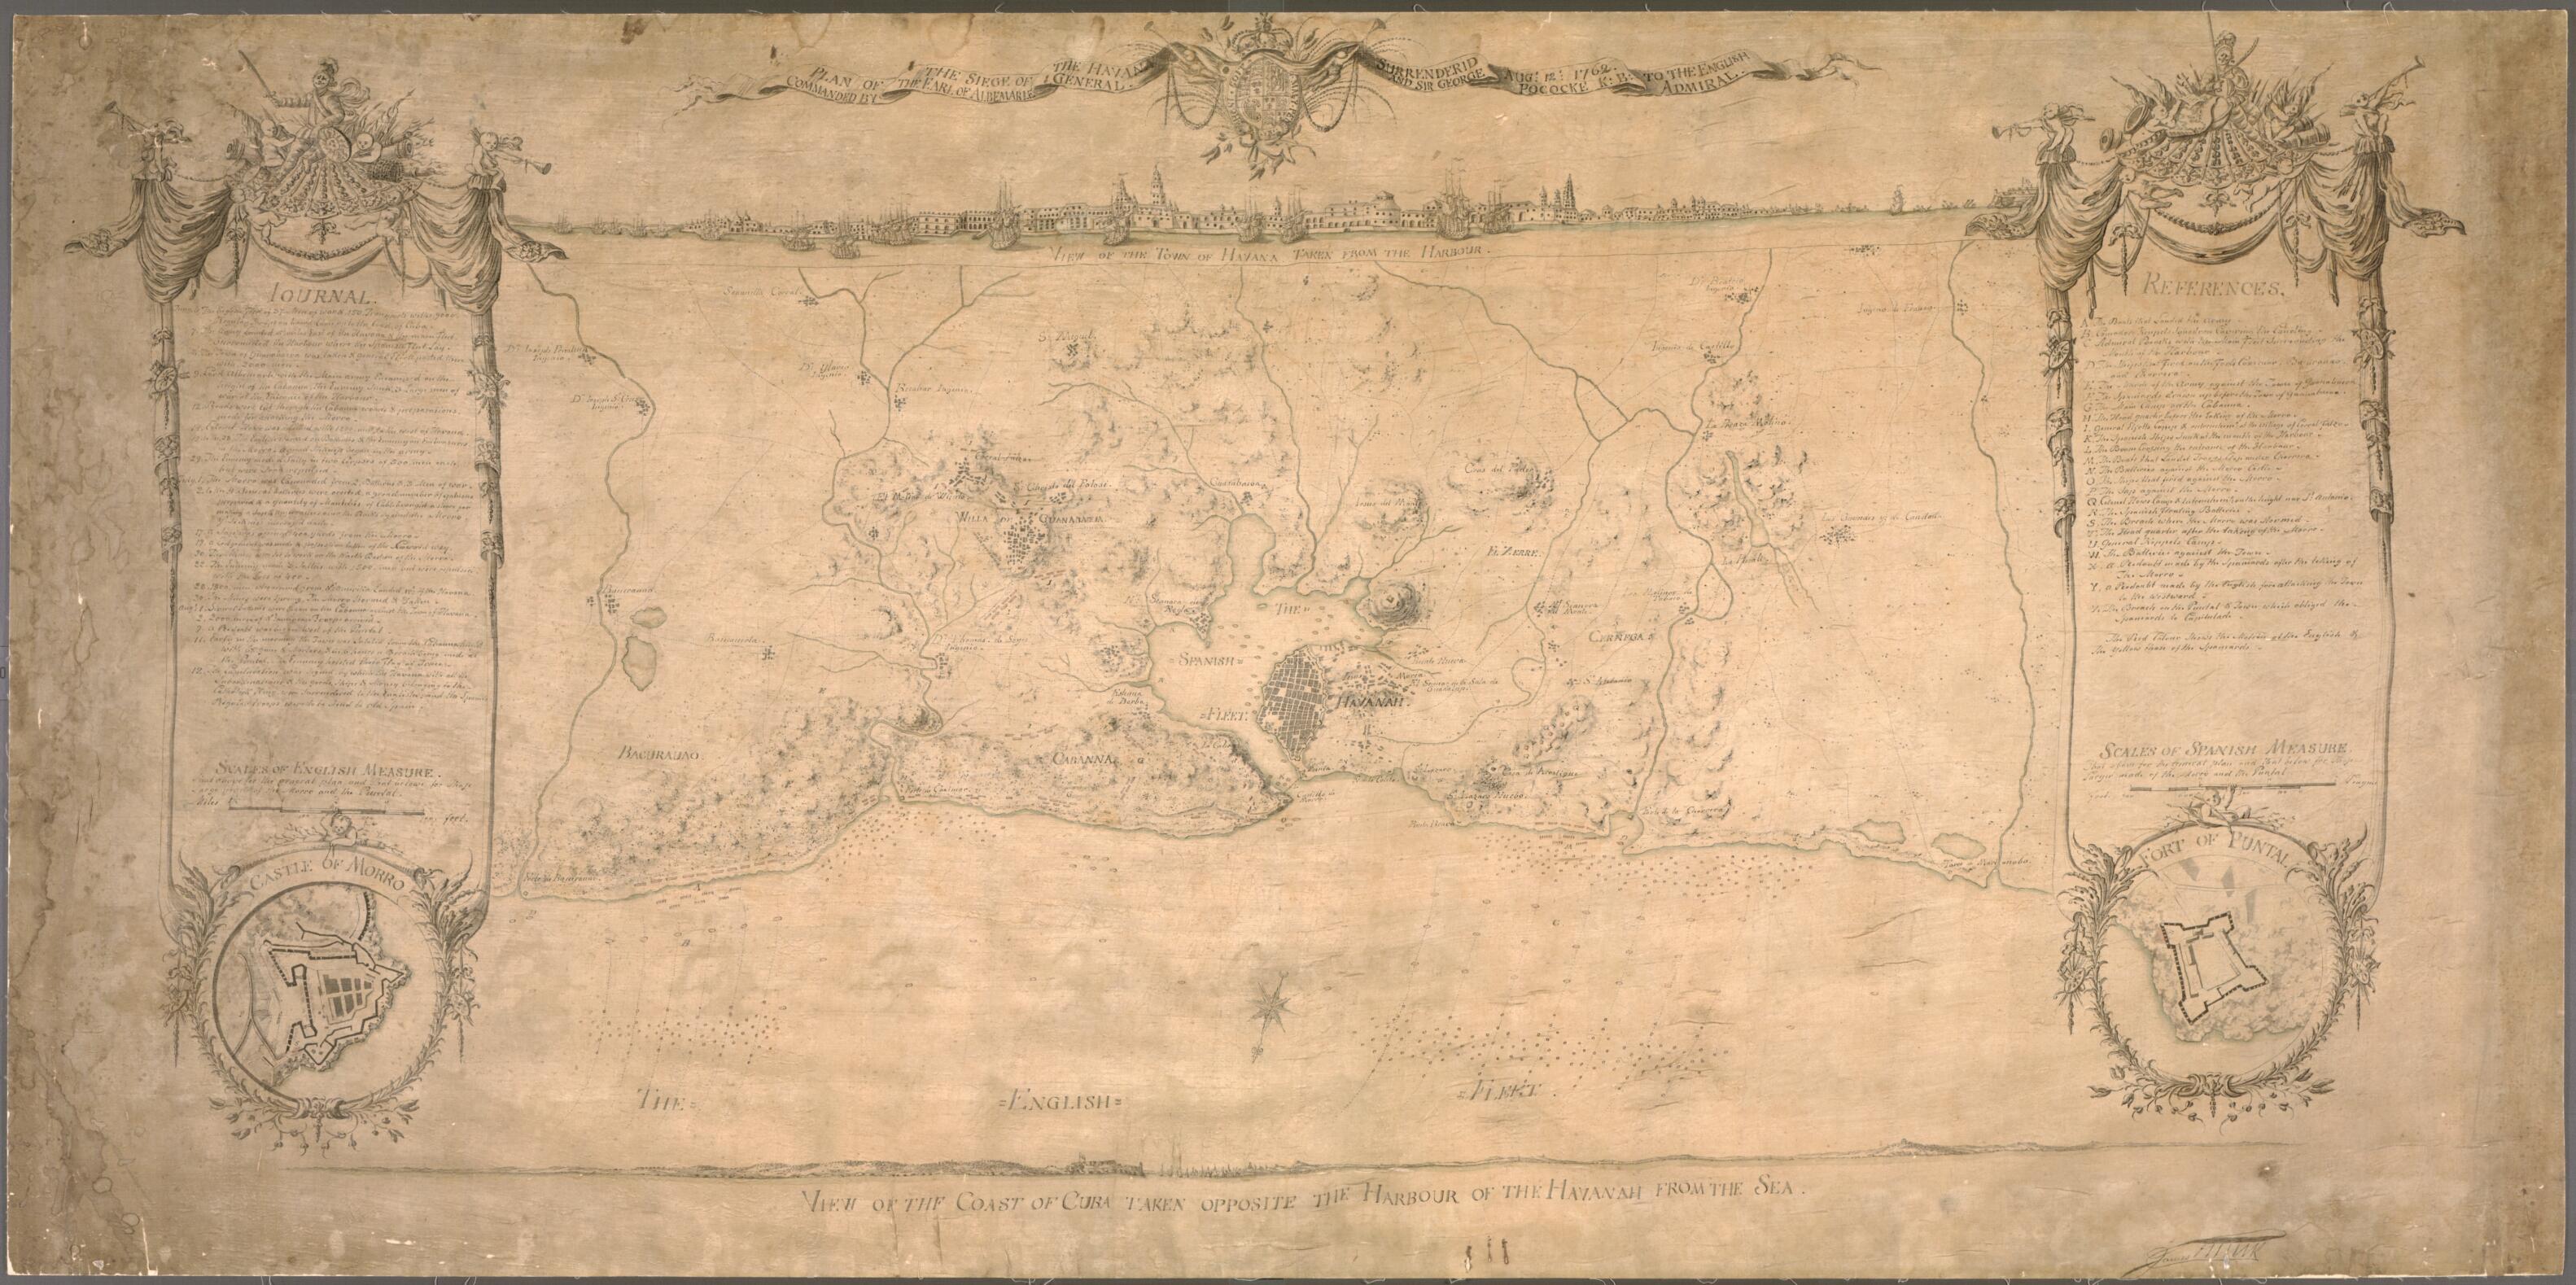 This old map of Plan of the Siege of the Havana Surrenderid sic Aug. 12, from 1762 to the English Commanded by the Earl of Albemarle General and Sir George Pococke K.B. Admiral was created by James Hawk in 1762